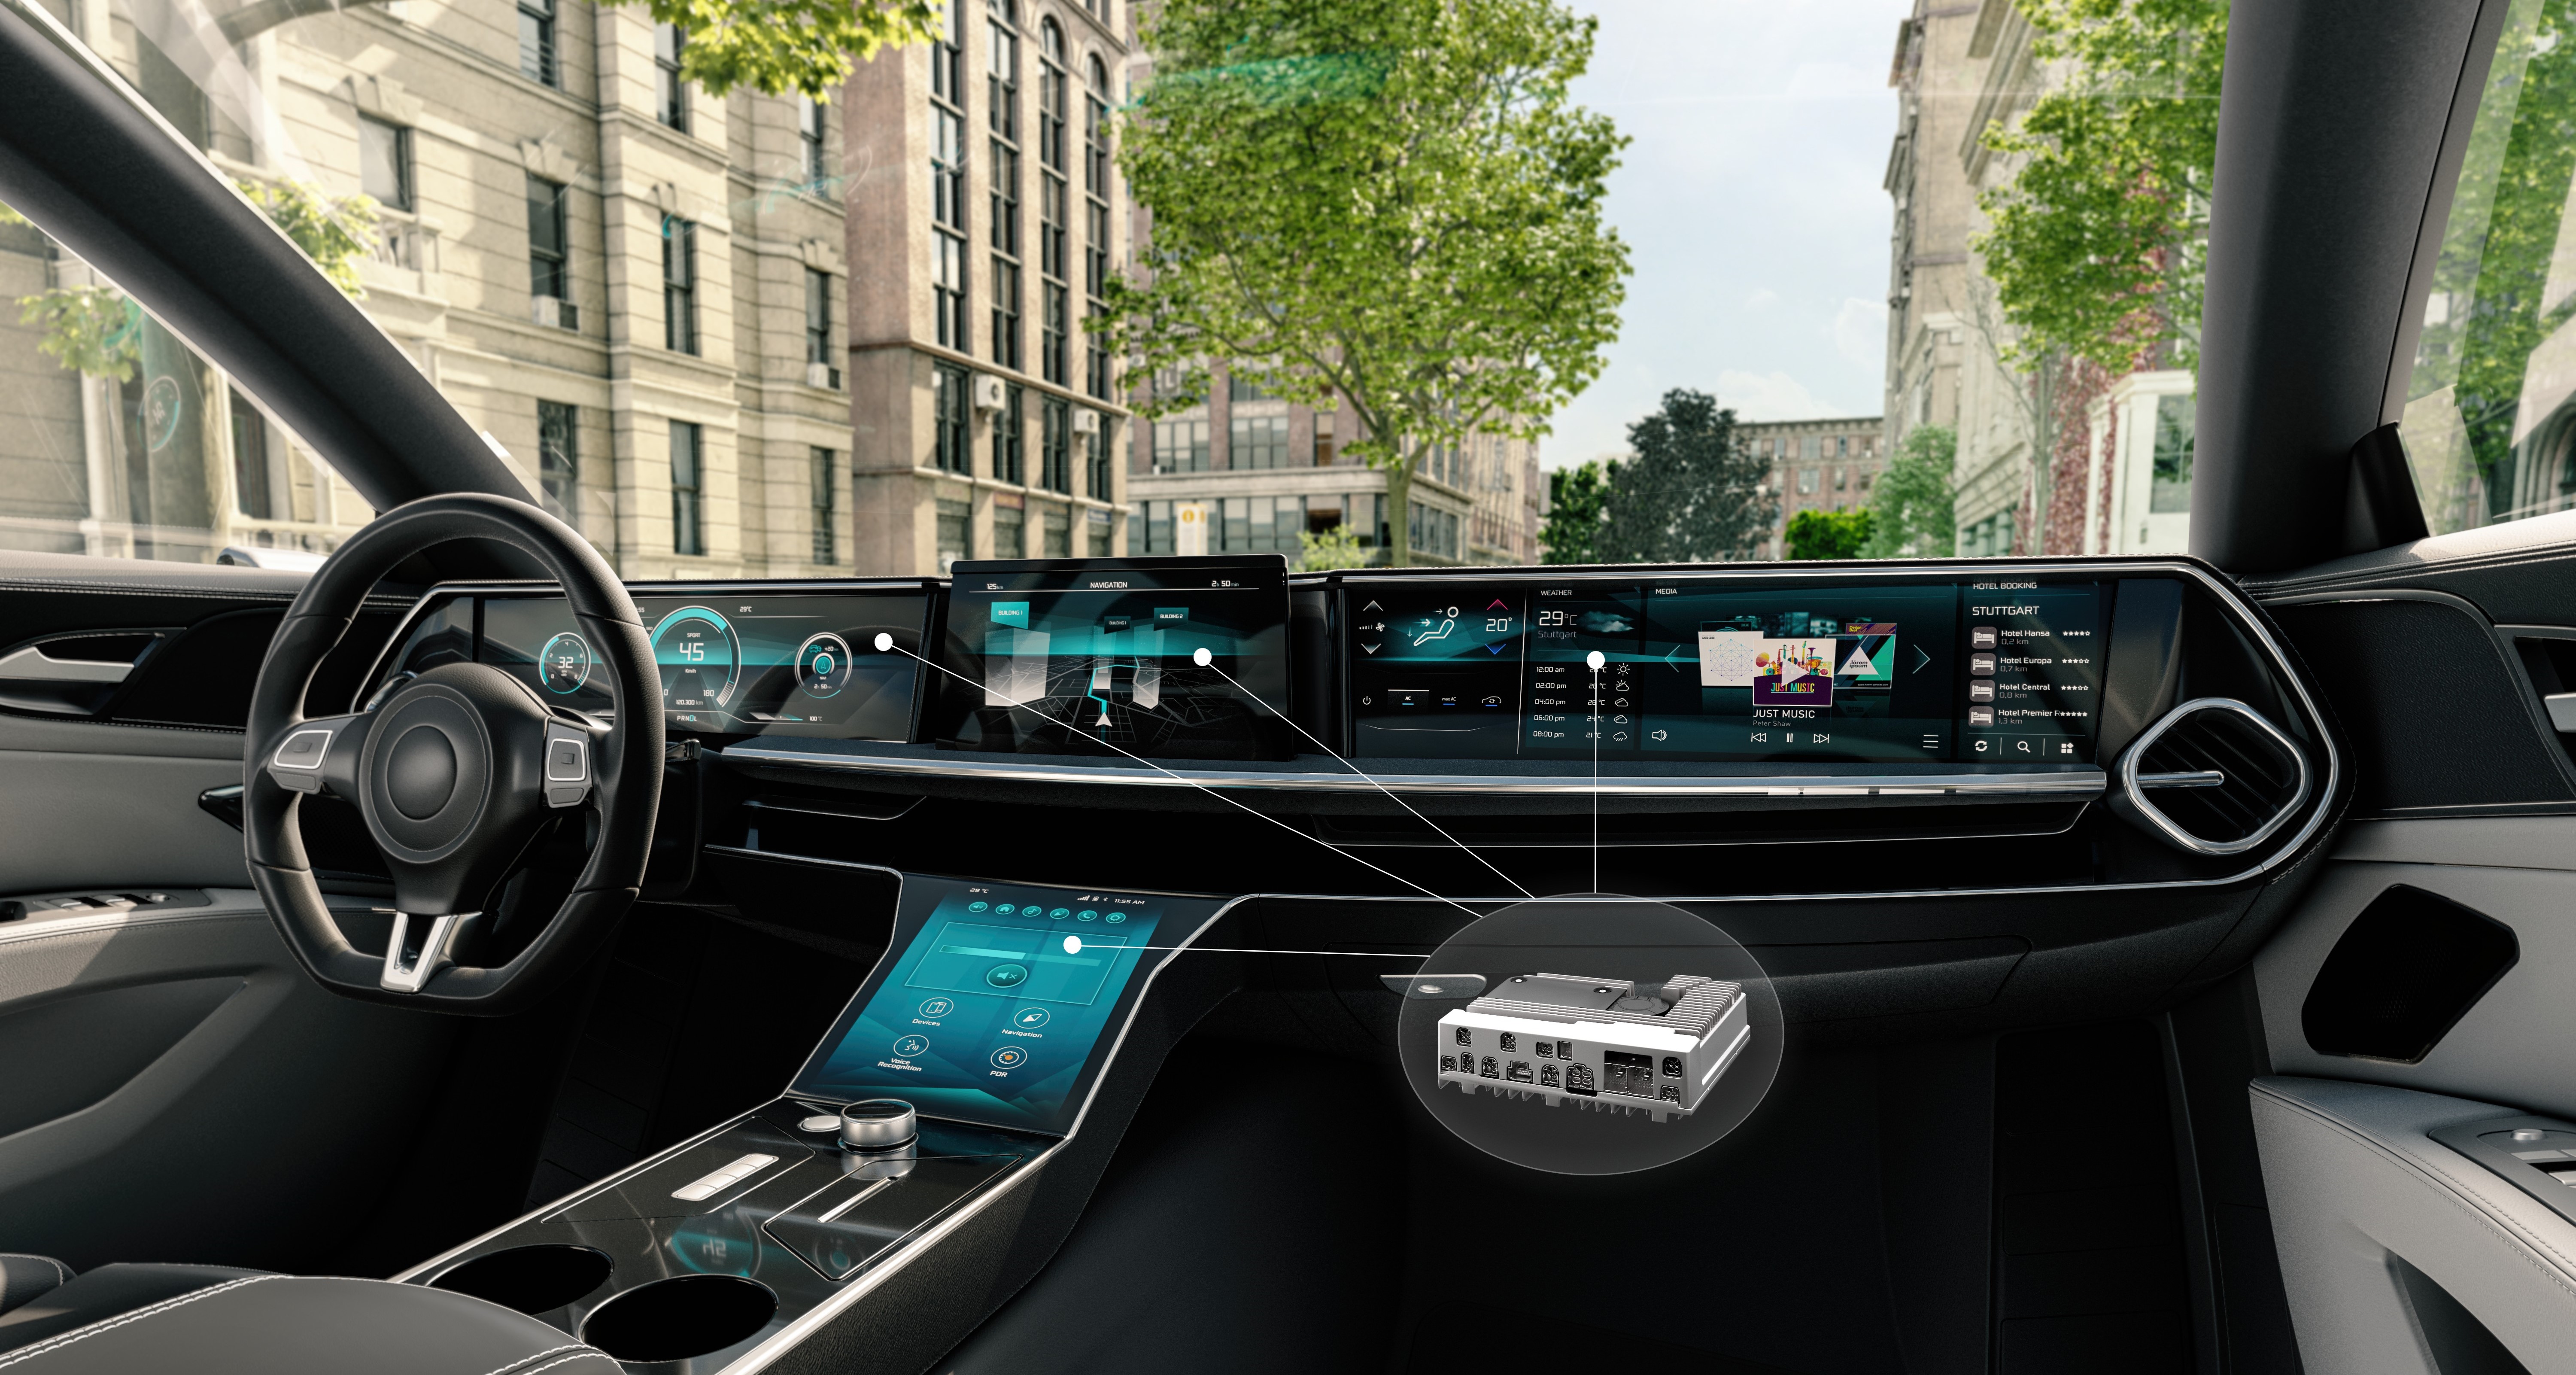 Bosch’s New Infotainment Computer Aimed at Software Defined Vehicle